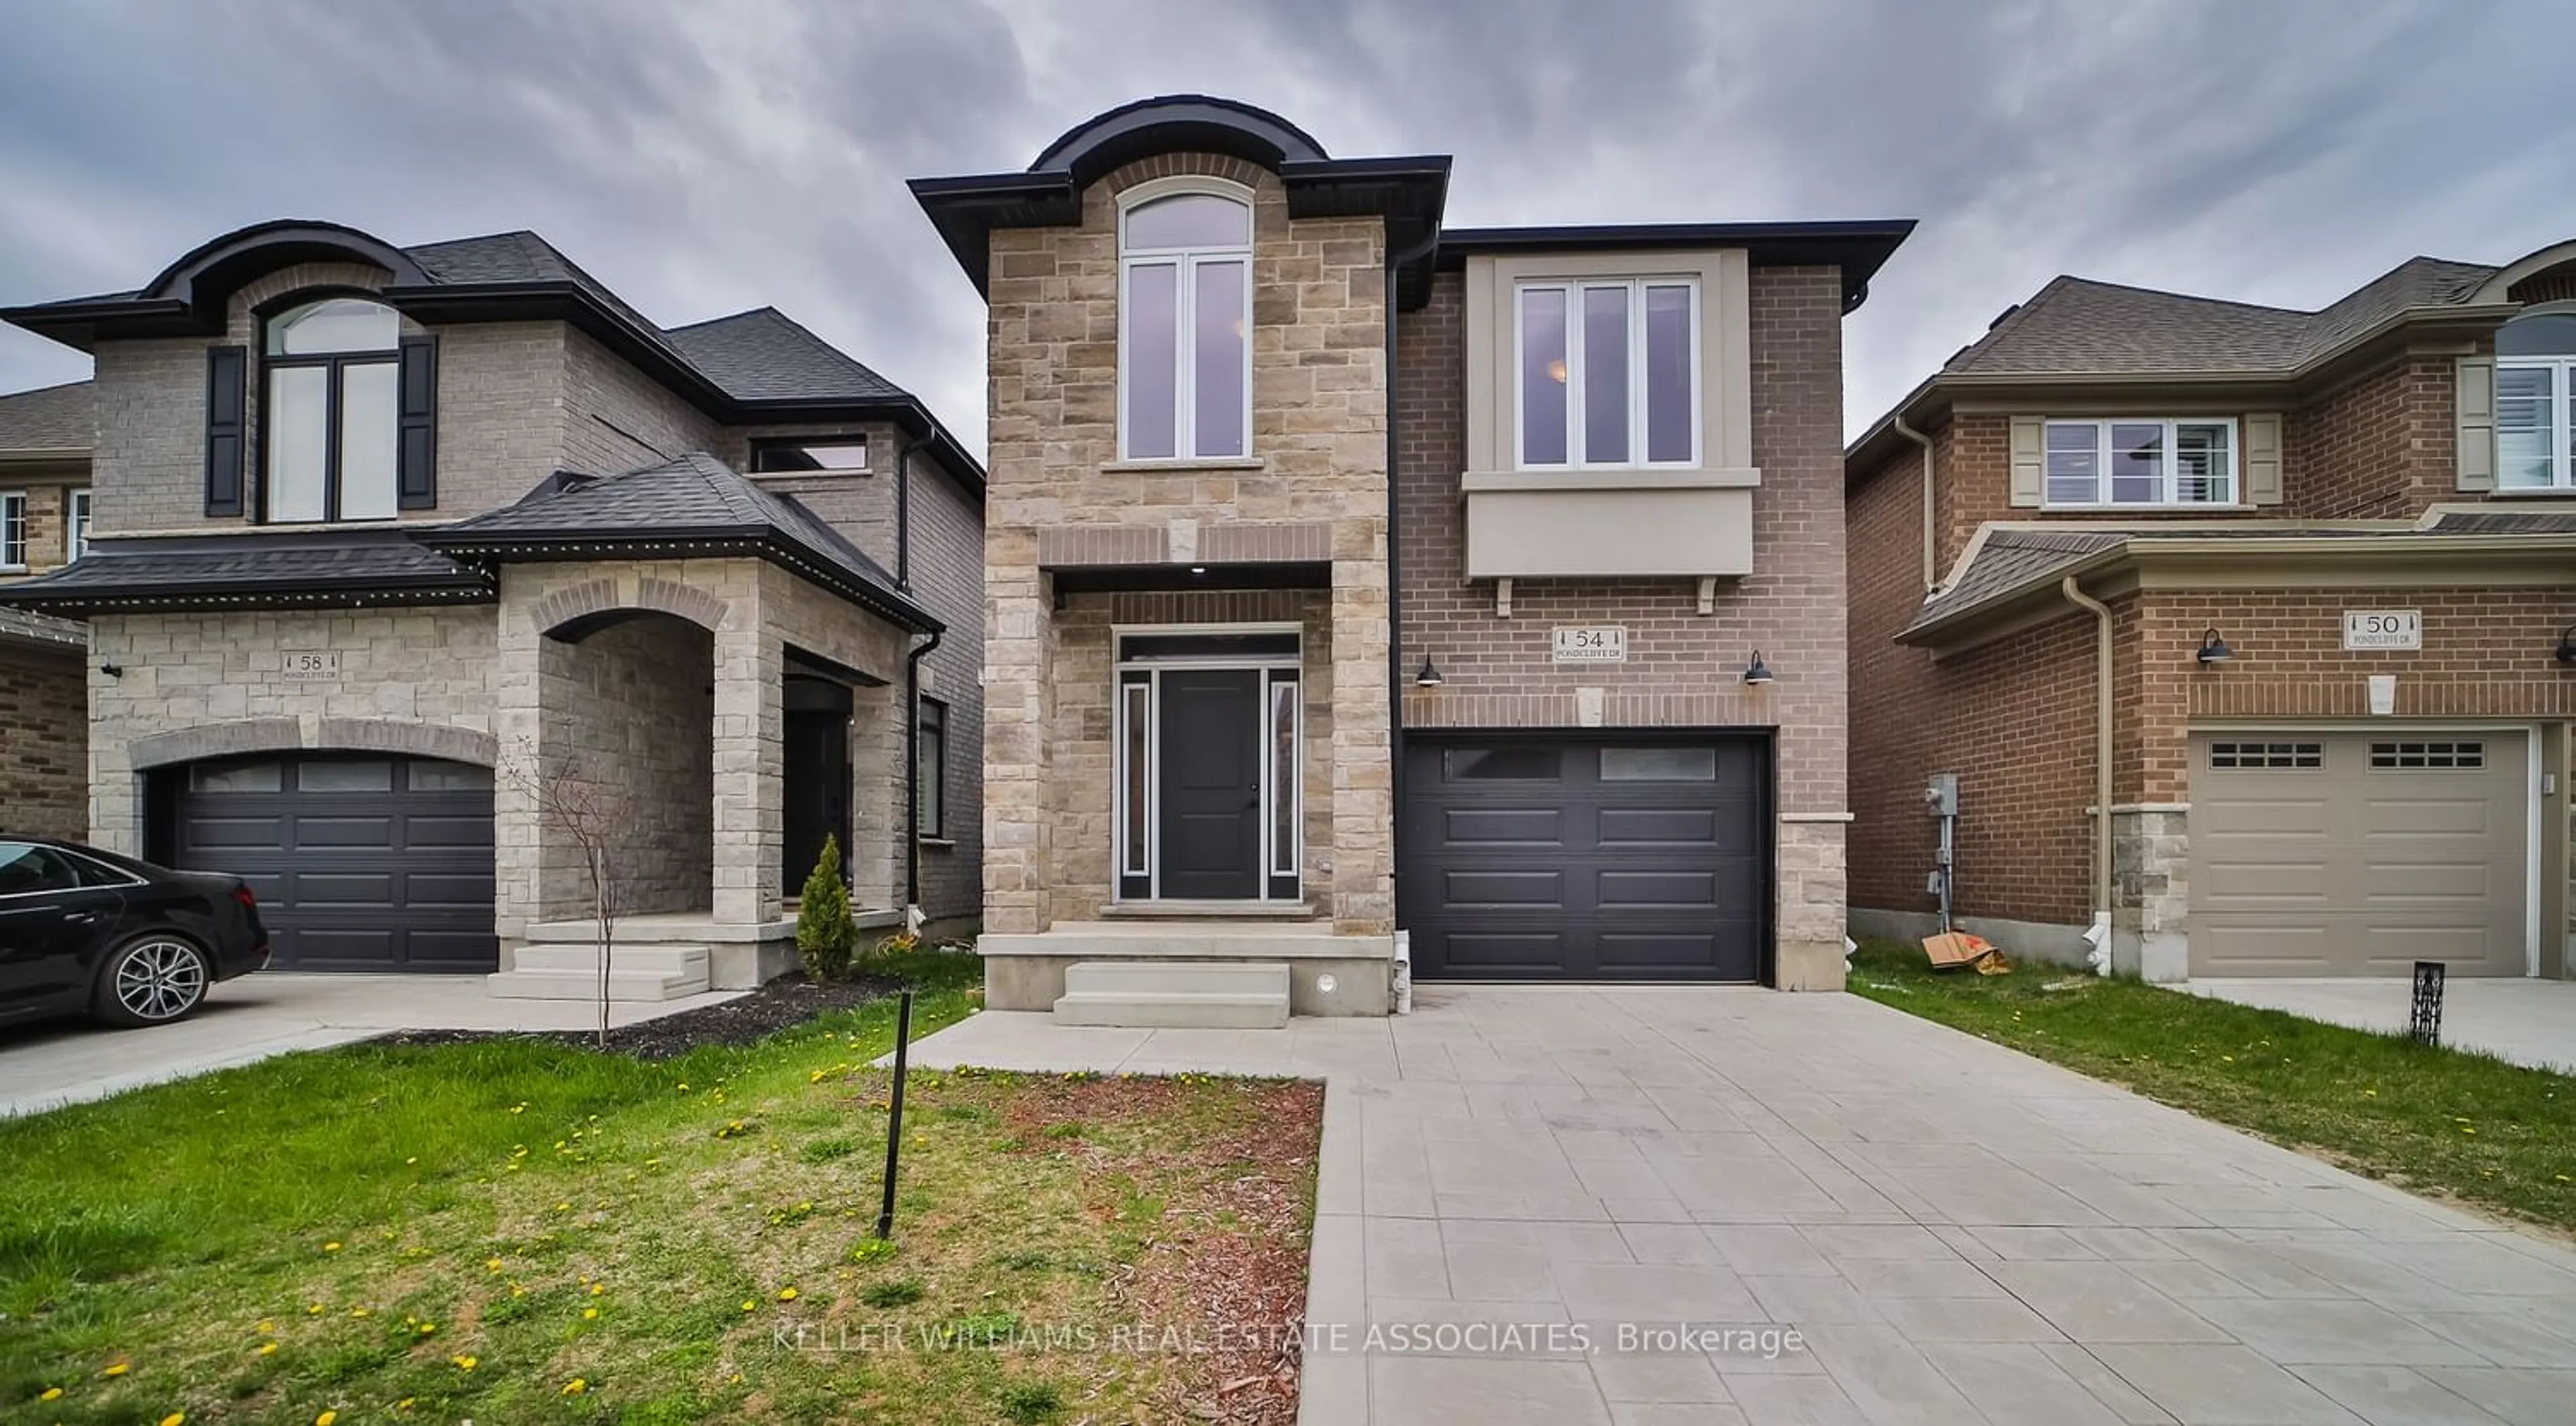 Home with brick exterior material for 54 Pondcliffe Dr, Kitchener Ontario N2P 2R3